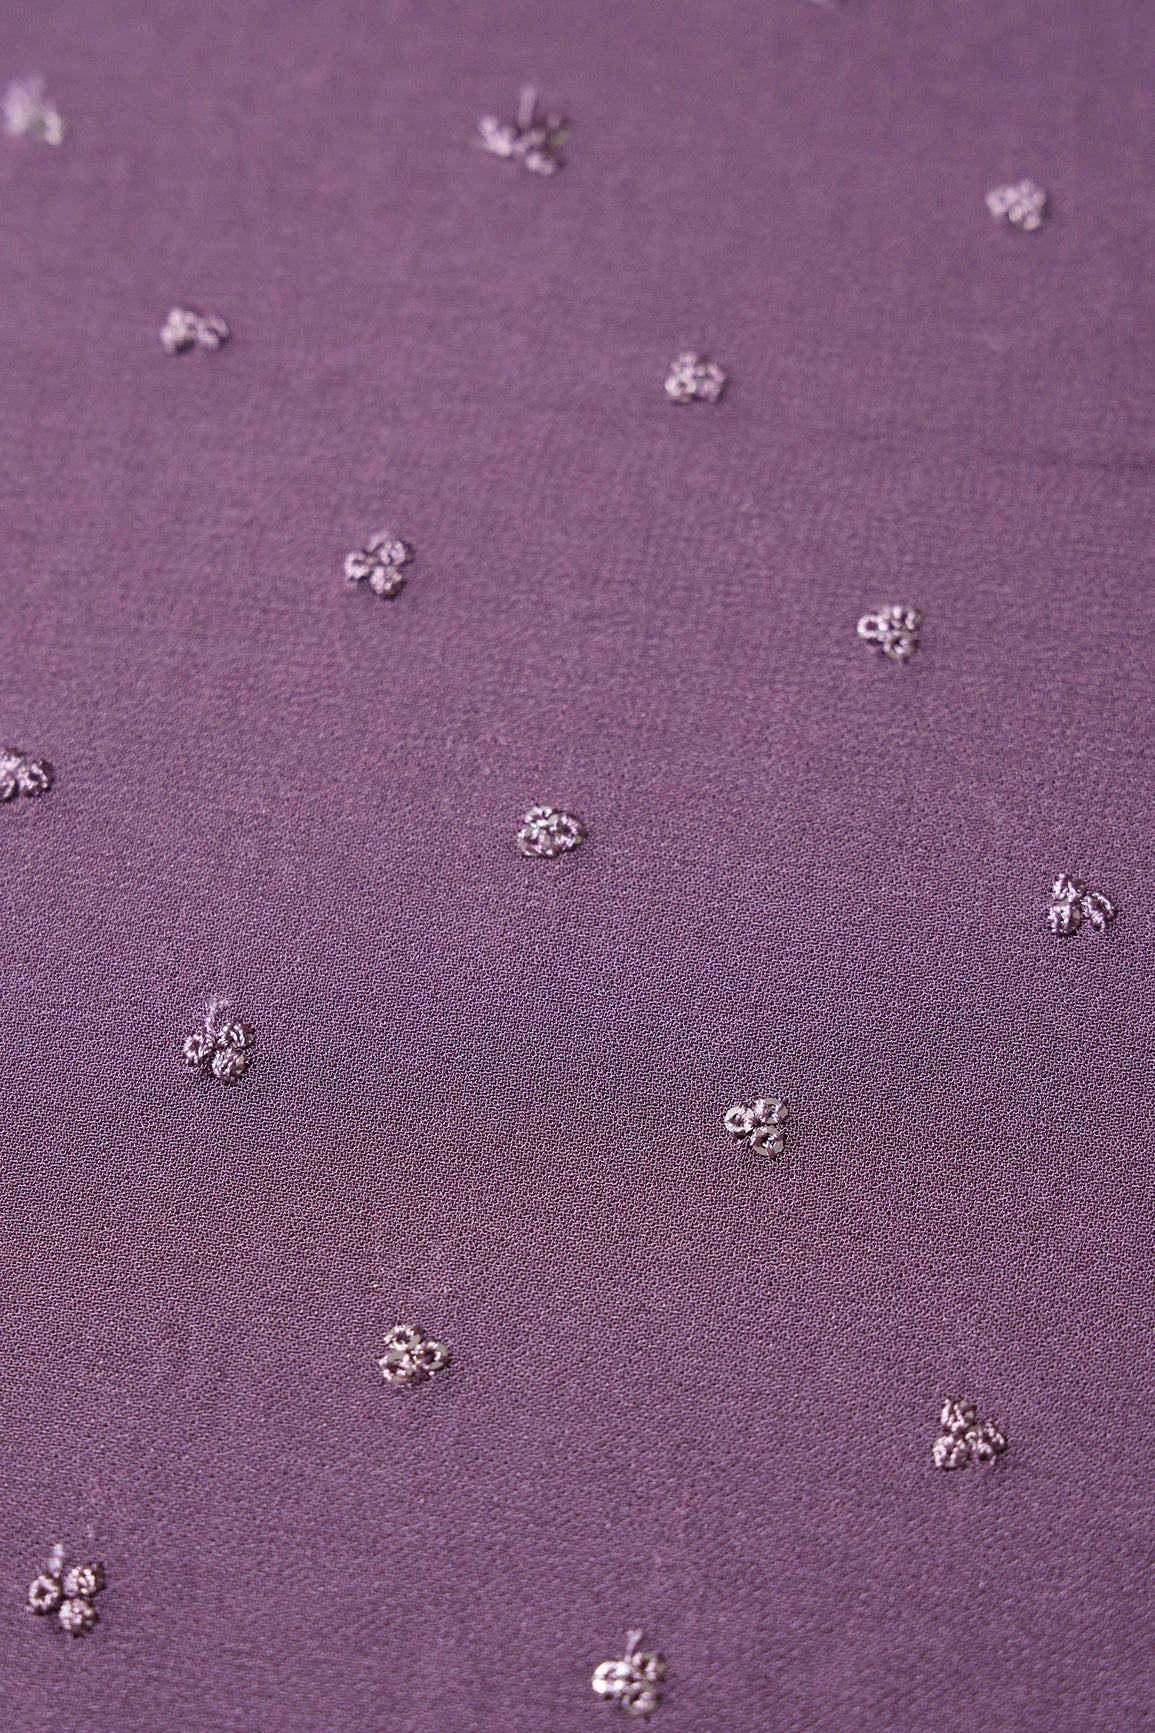 Small Motif Sequins Embroidery On Voila Purple Viscose Georgette Fabric - doeraa